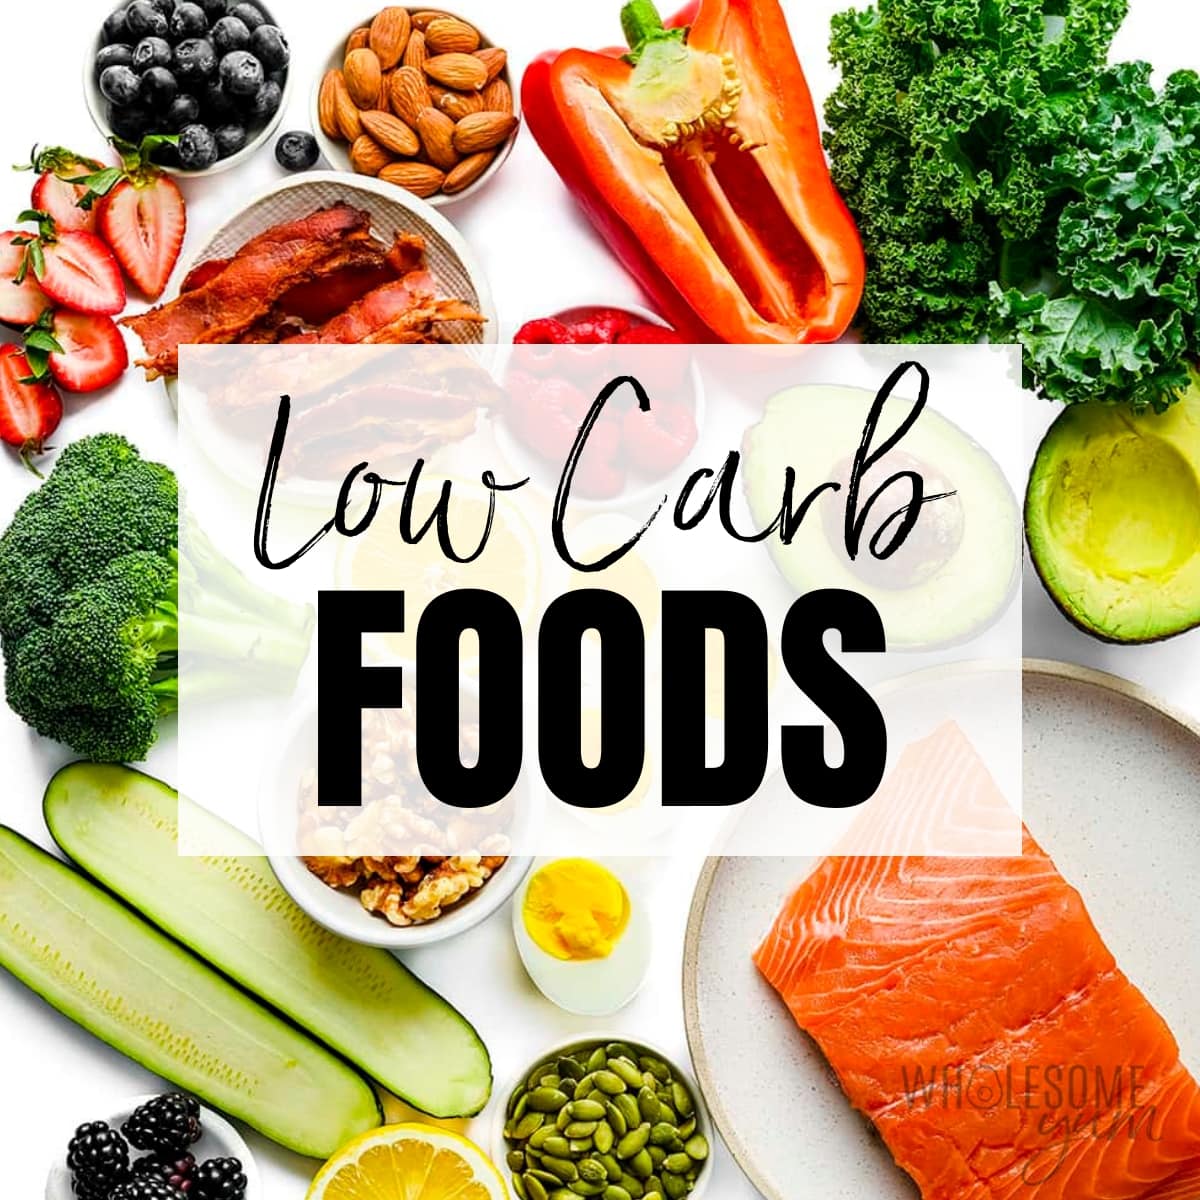 Low carb foods on a white surface.